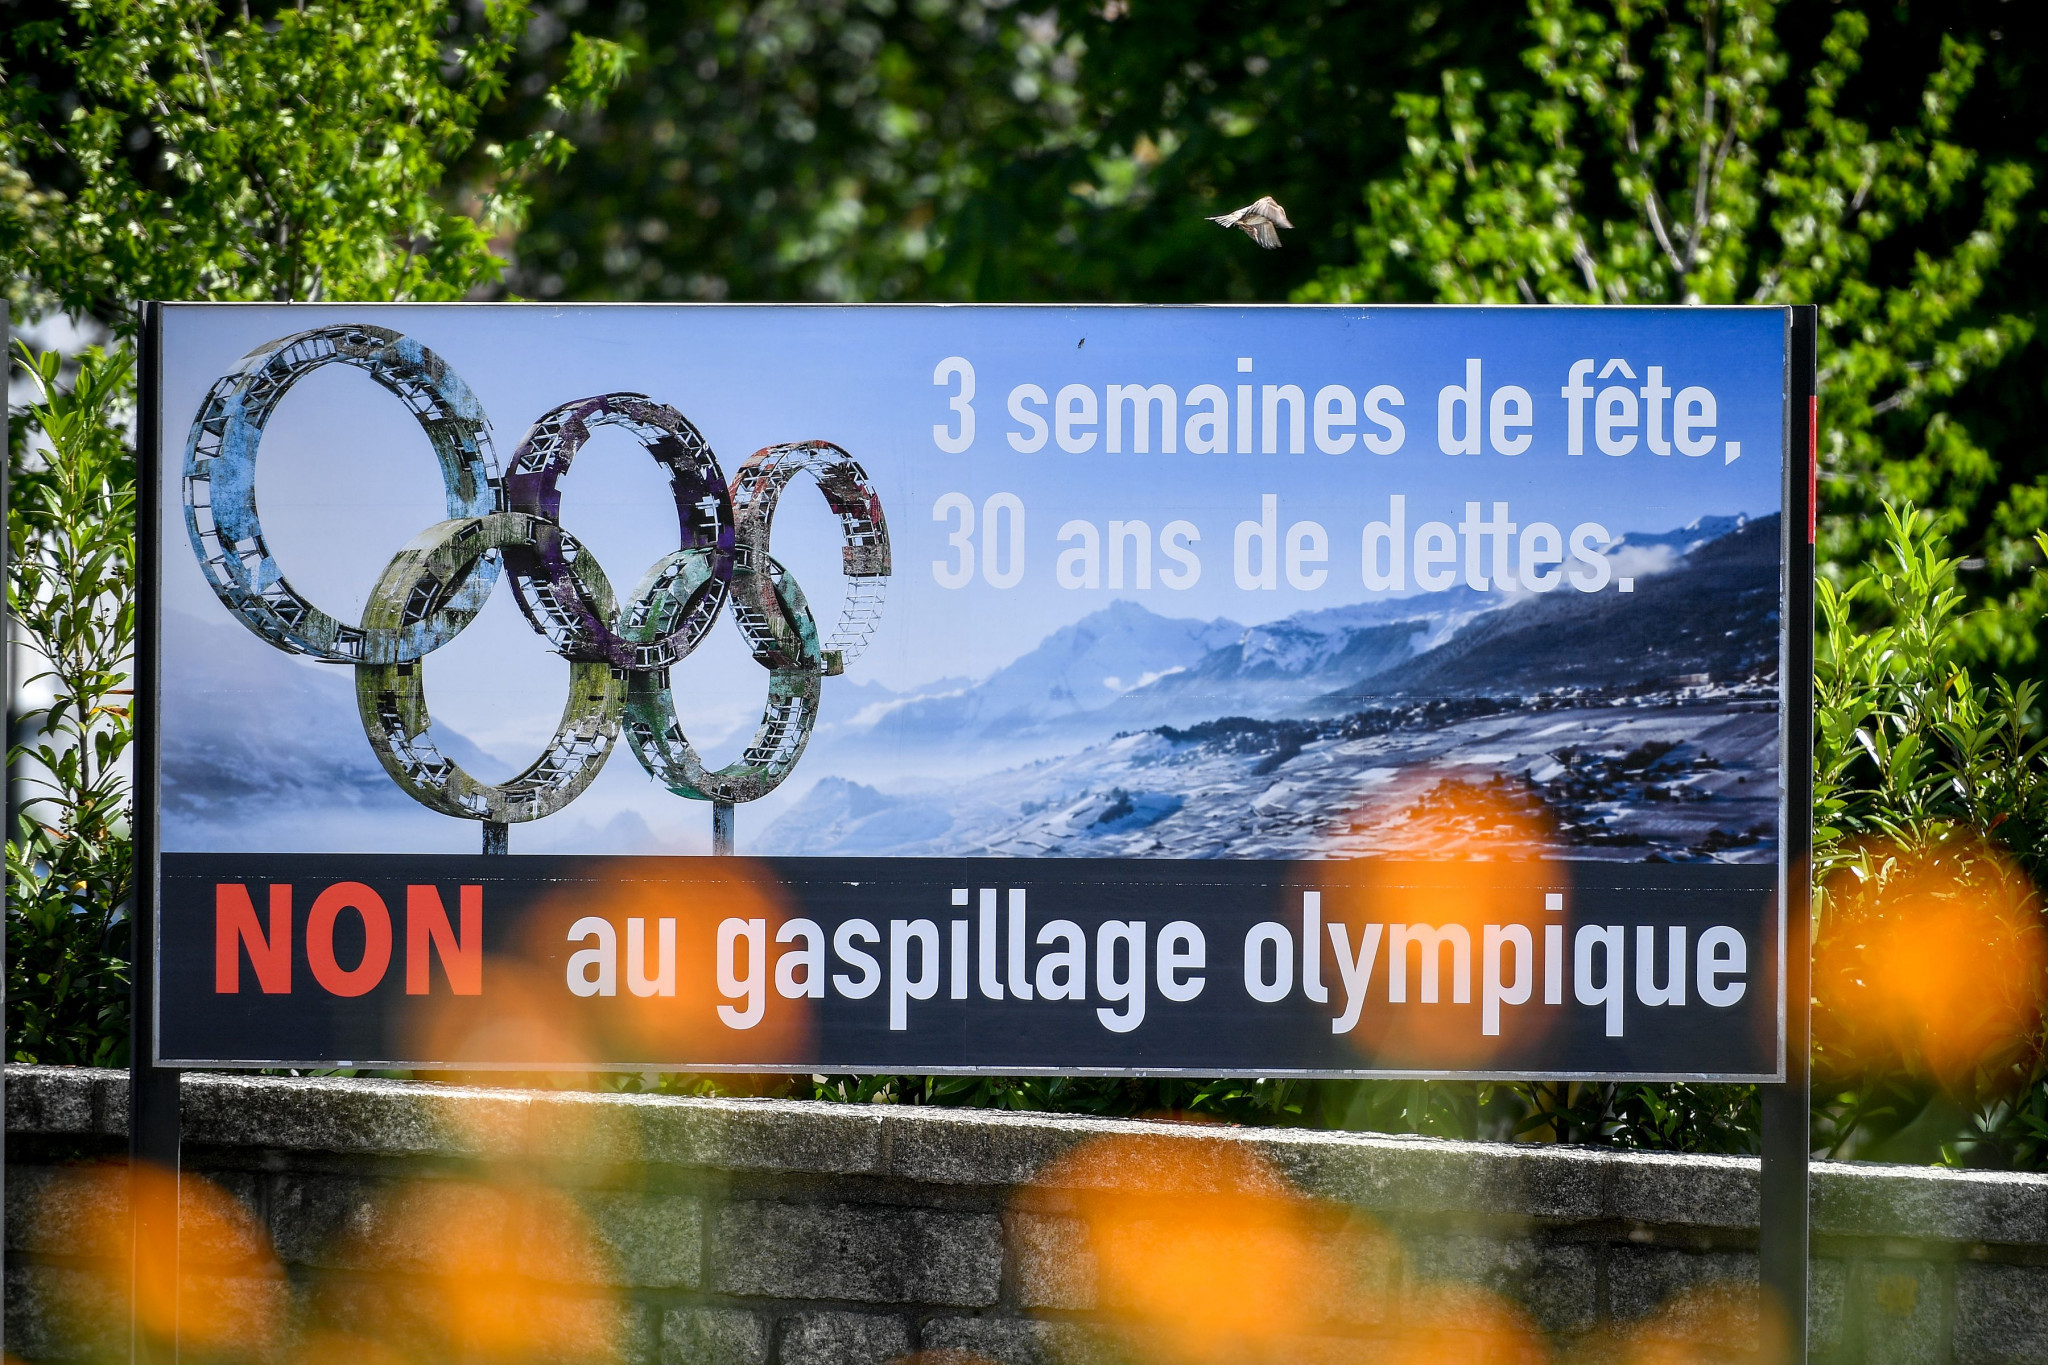 An advert by those opposed to the Sion 2026 bid ©Getty Images